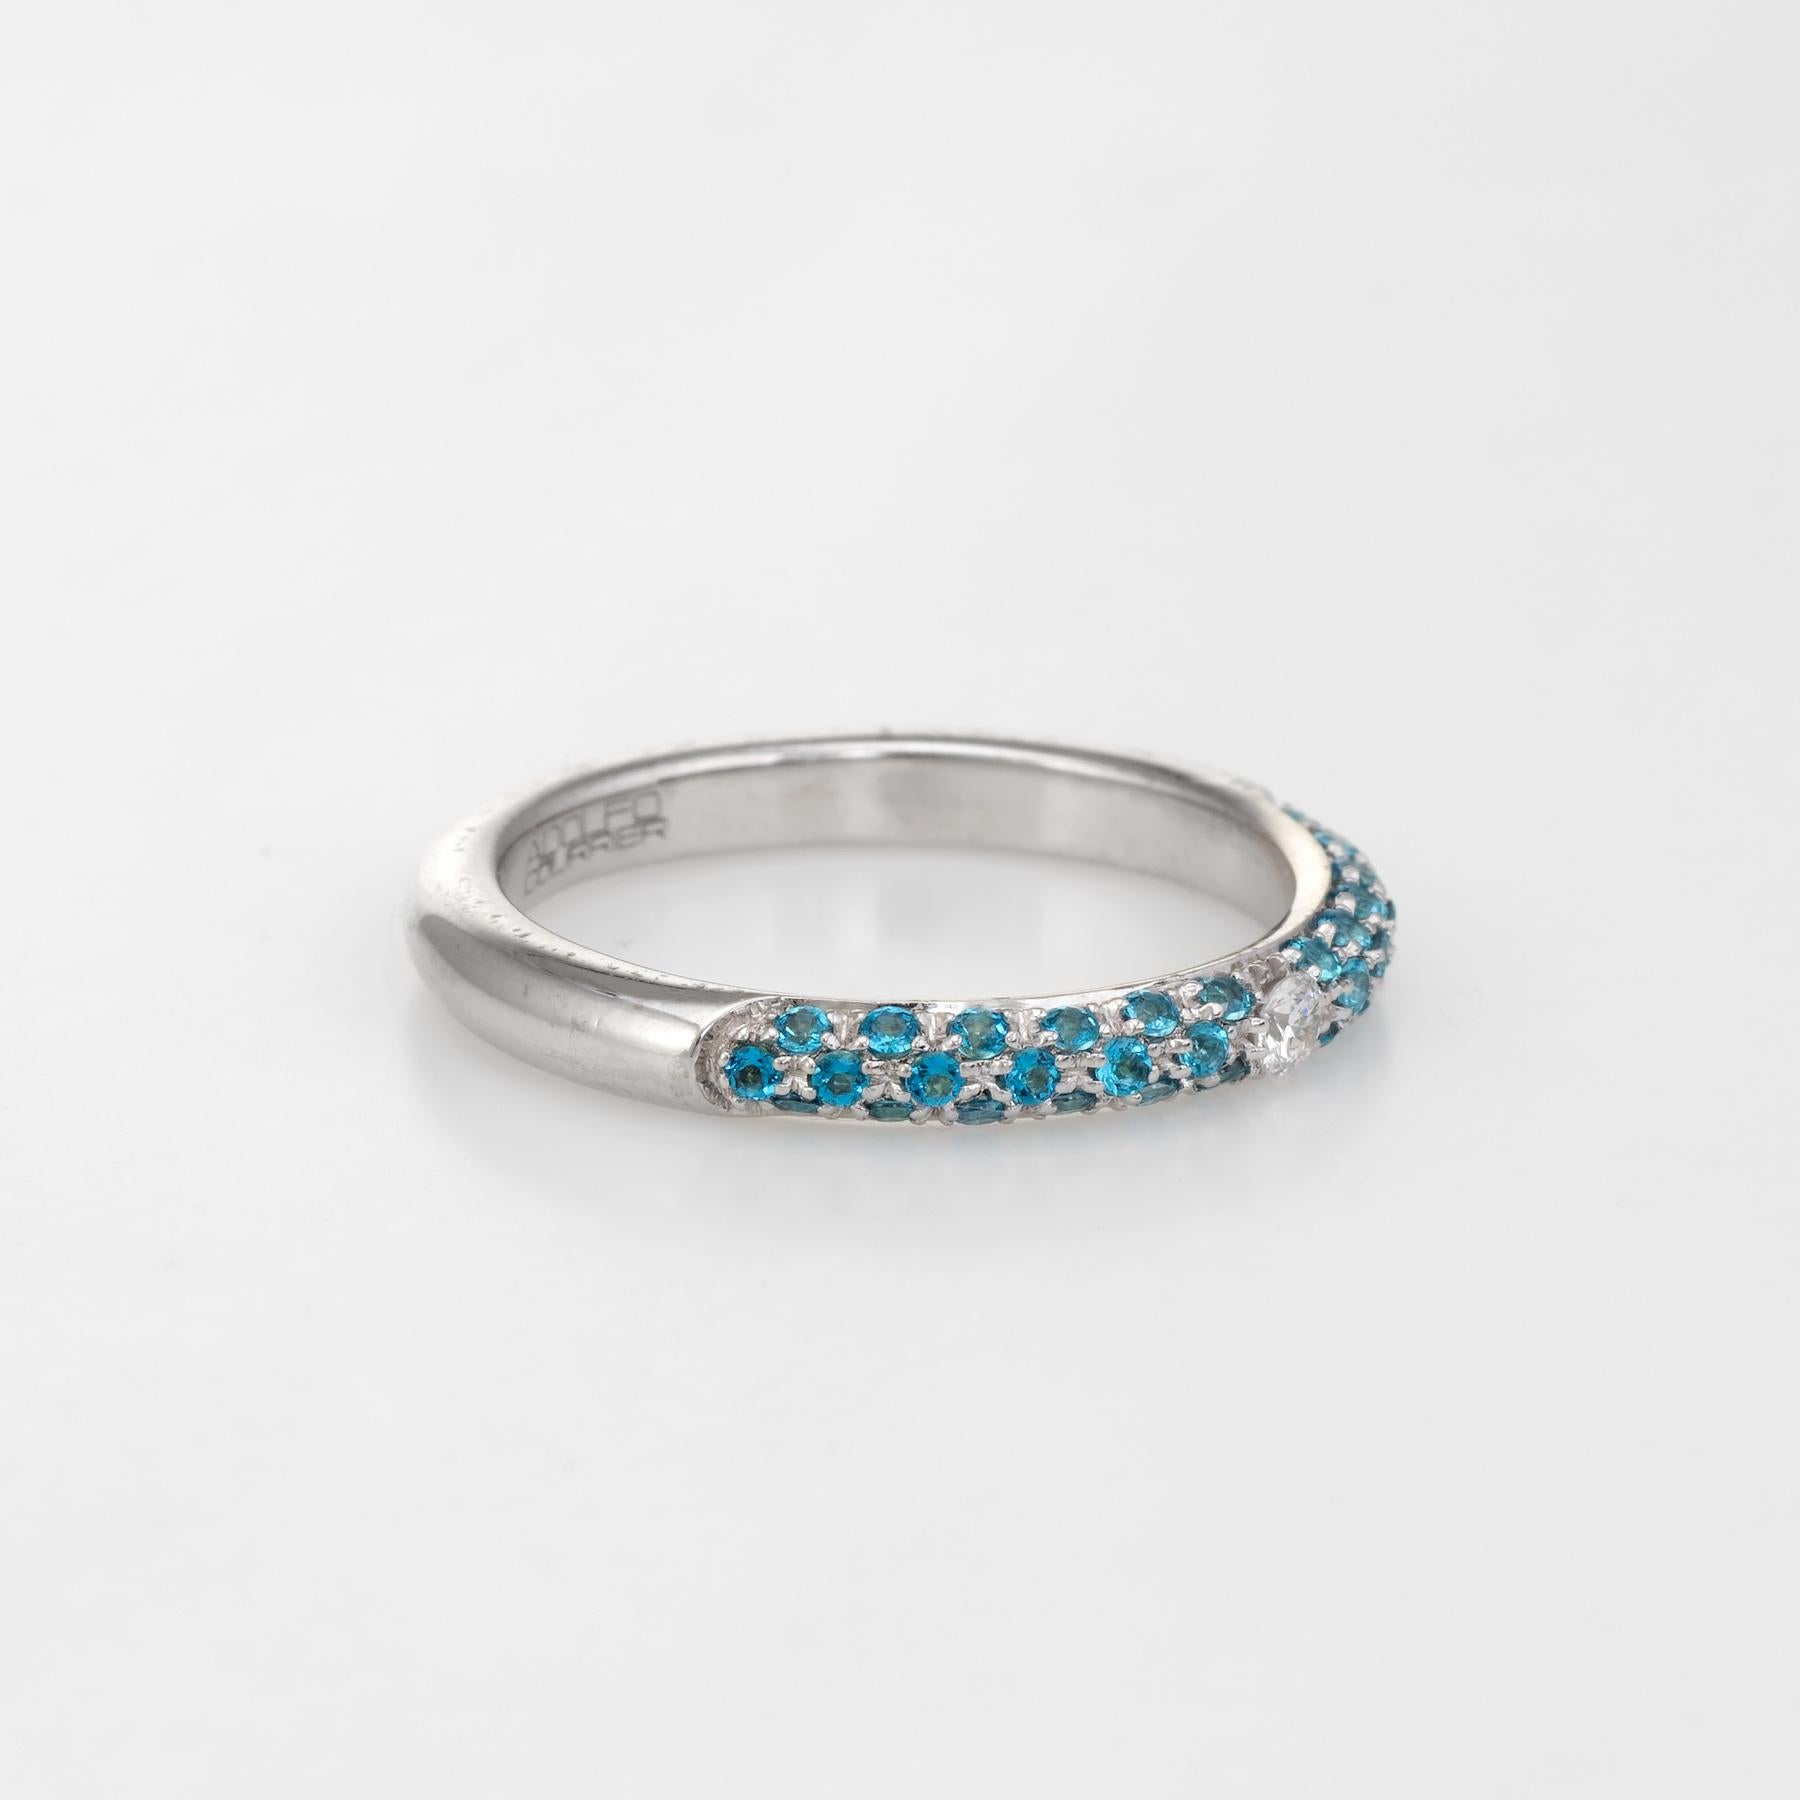 Contemporary Adolfo Courrier Pave Turquoise Diamond Stacking Ring 18 Karat Gold Jewelry